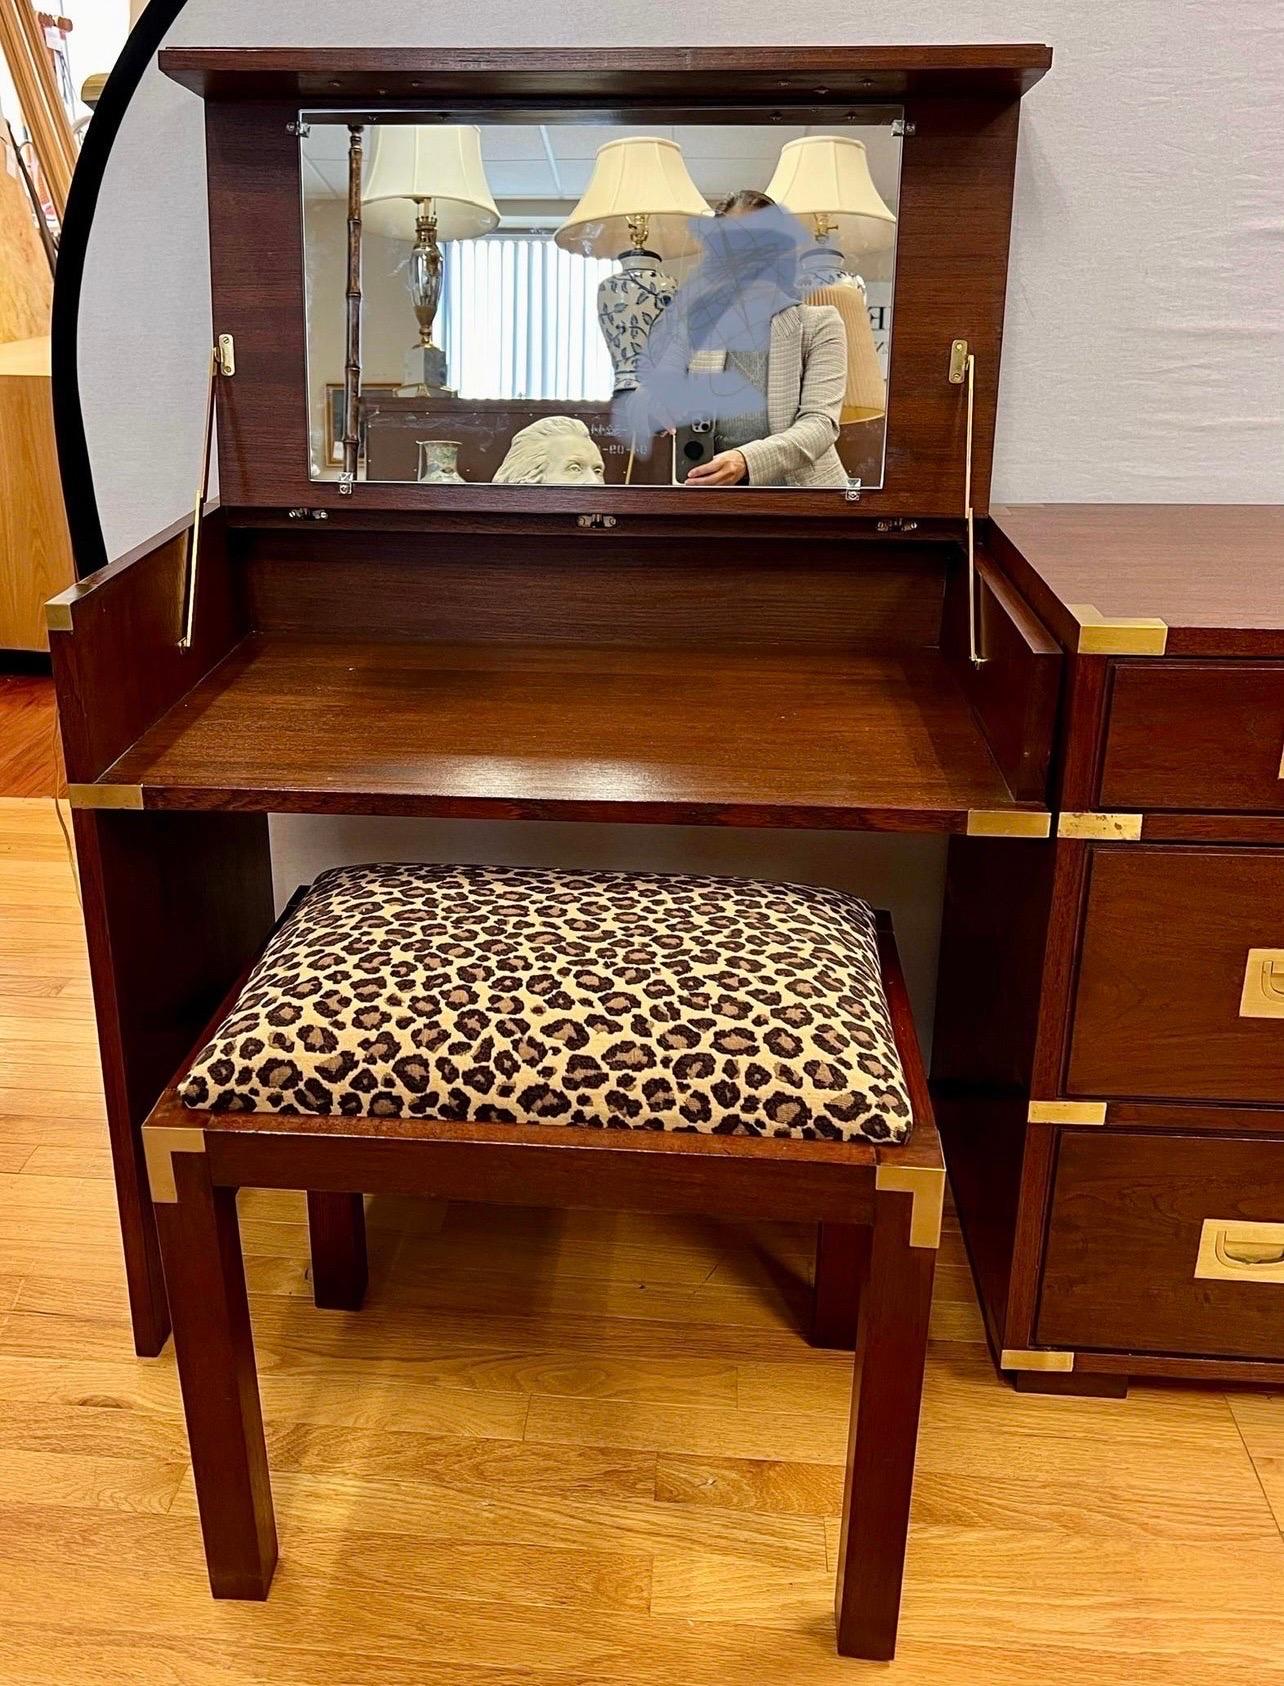 Vintage campaign style set features two-part construction consisting of a chest of drawers and vanity unit with flip-top mirror, paired with a matching stool. Features brass hardware and recessed brass pulls. Chest is attached to desk but can be